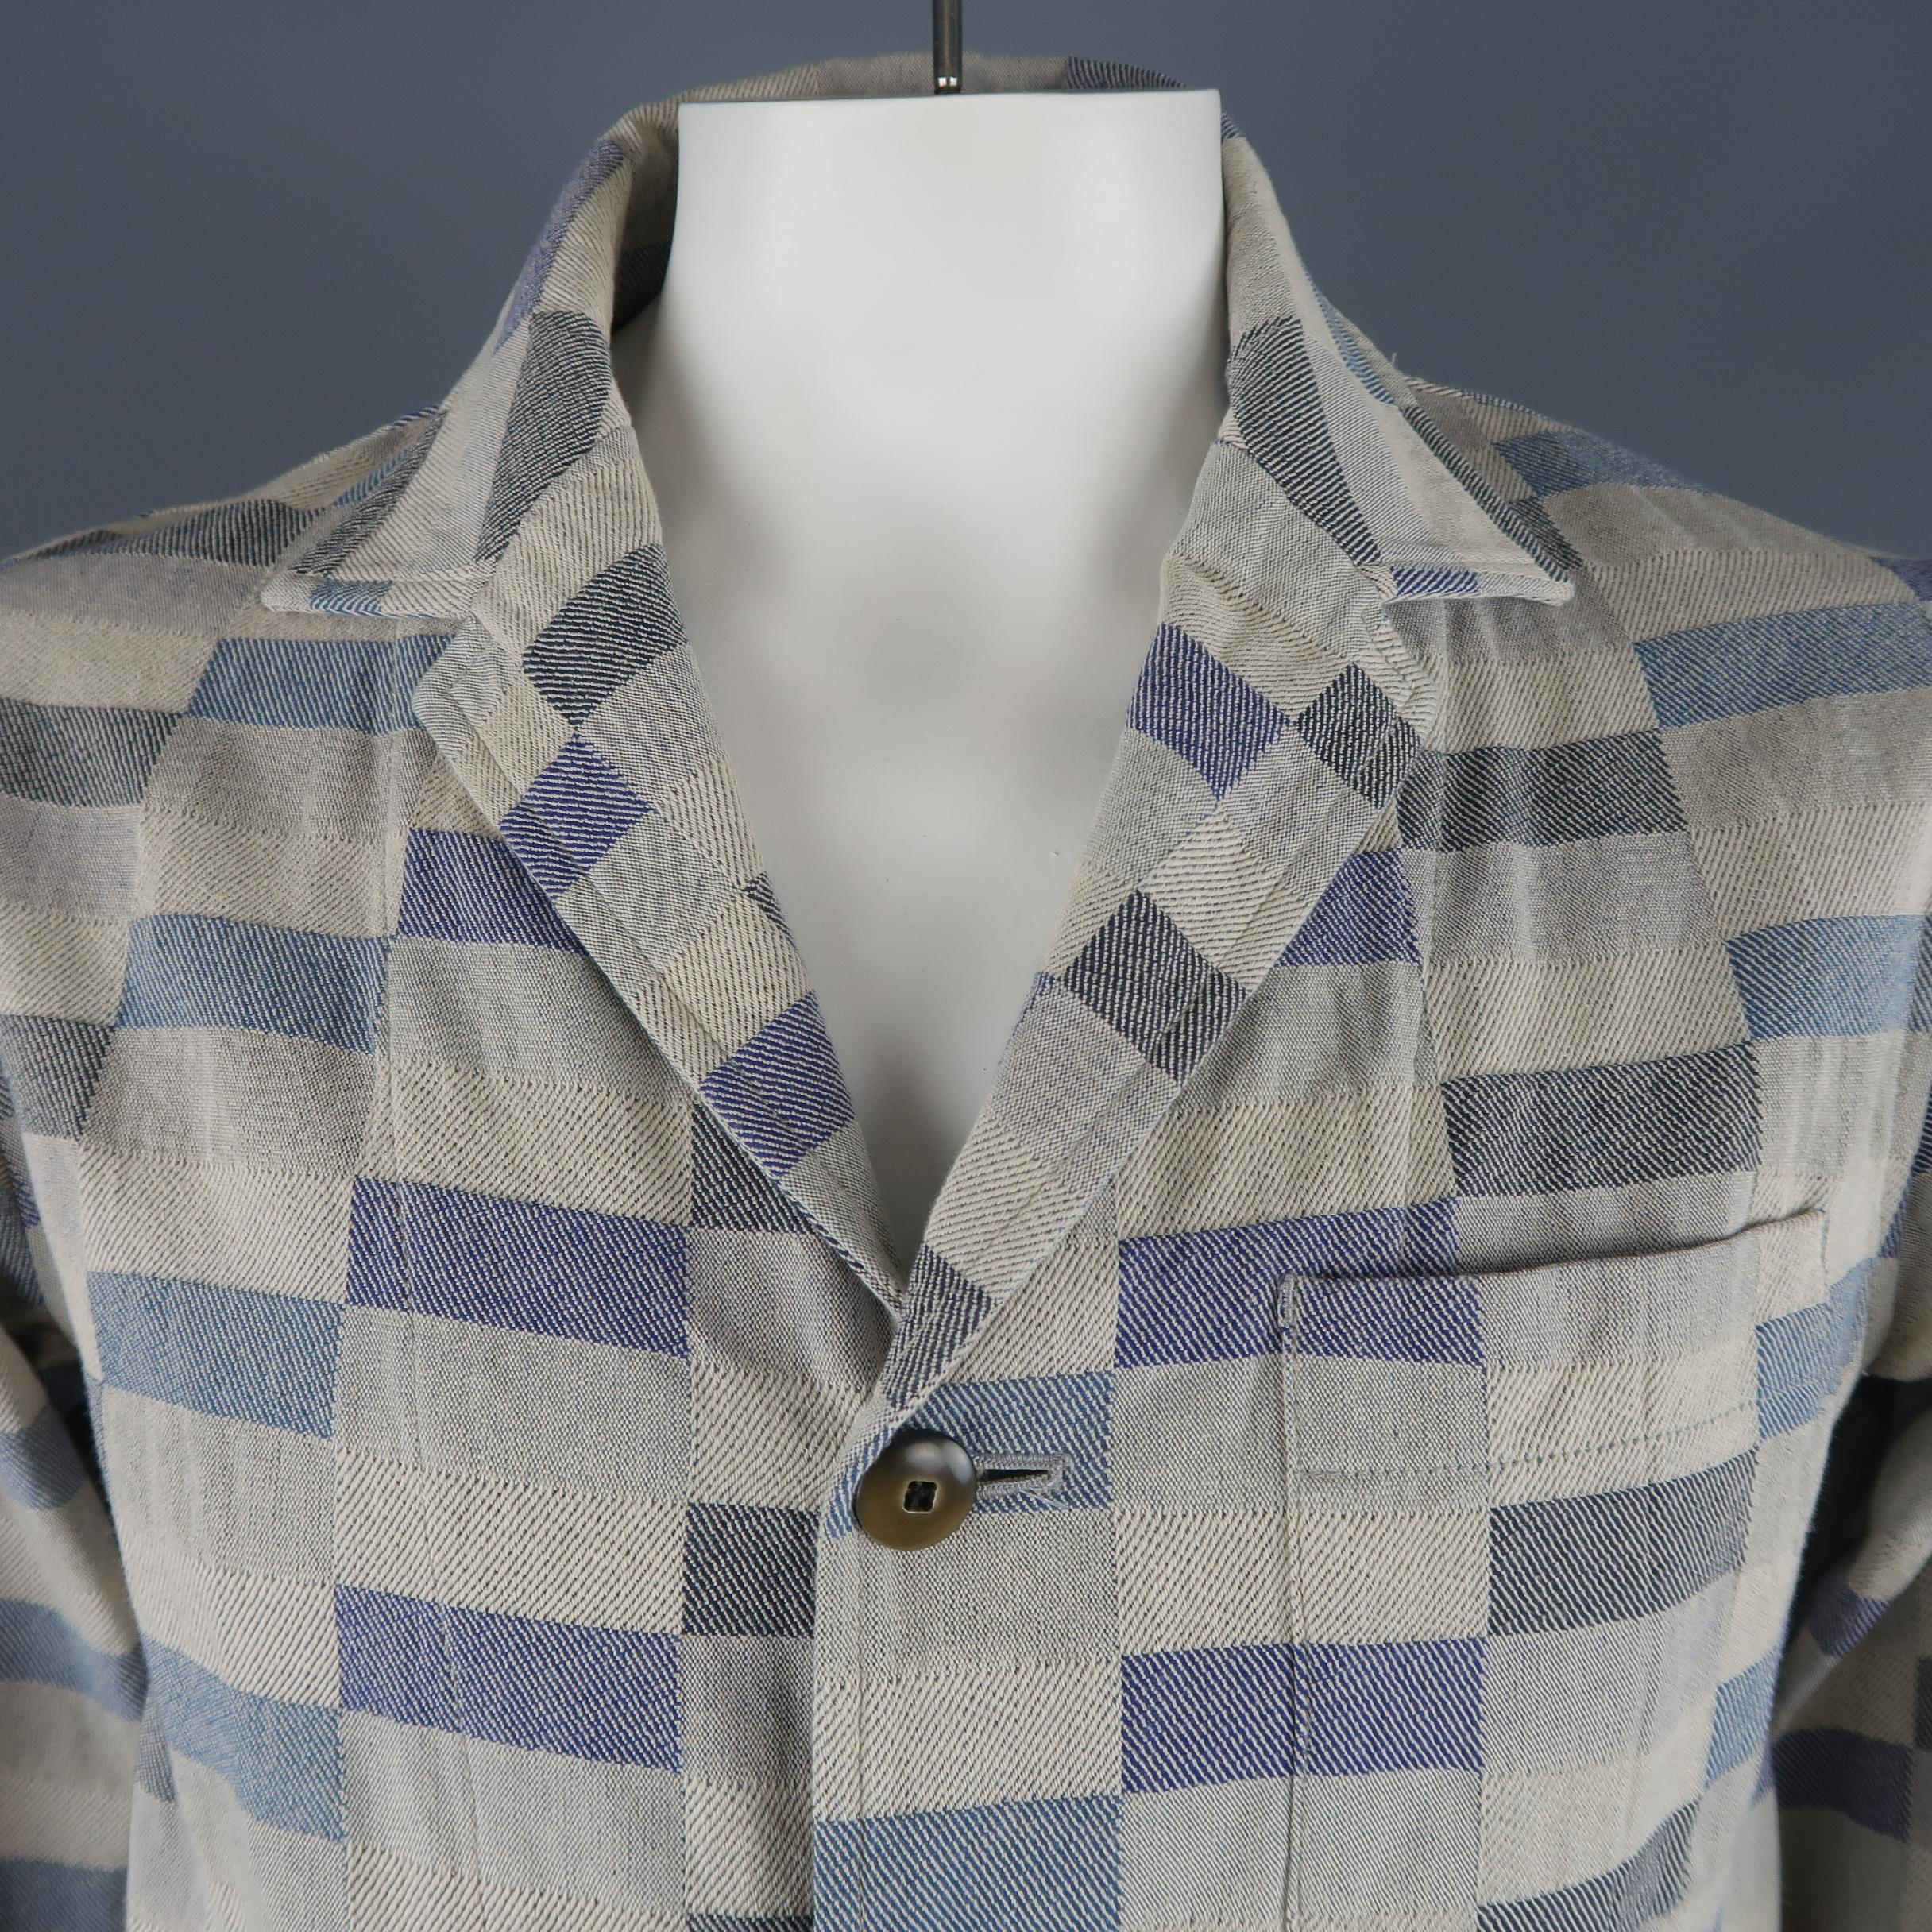 Single breasted TS(S) relaxed casual sport coat shirt jacket comes in beige and blue checkered print cotton twill with a notch lapel, three button front, functional button cuffs, and patch pockets. Made in Japan.
 
Good Pre-Owned Condition.
Marked: